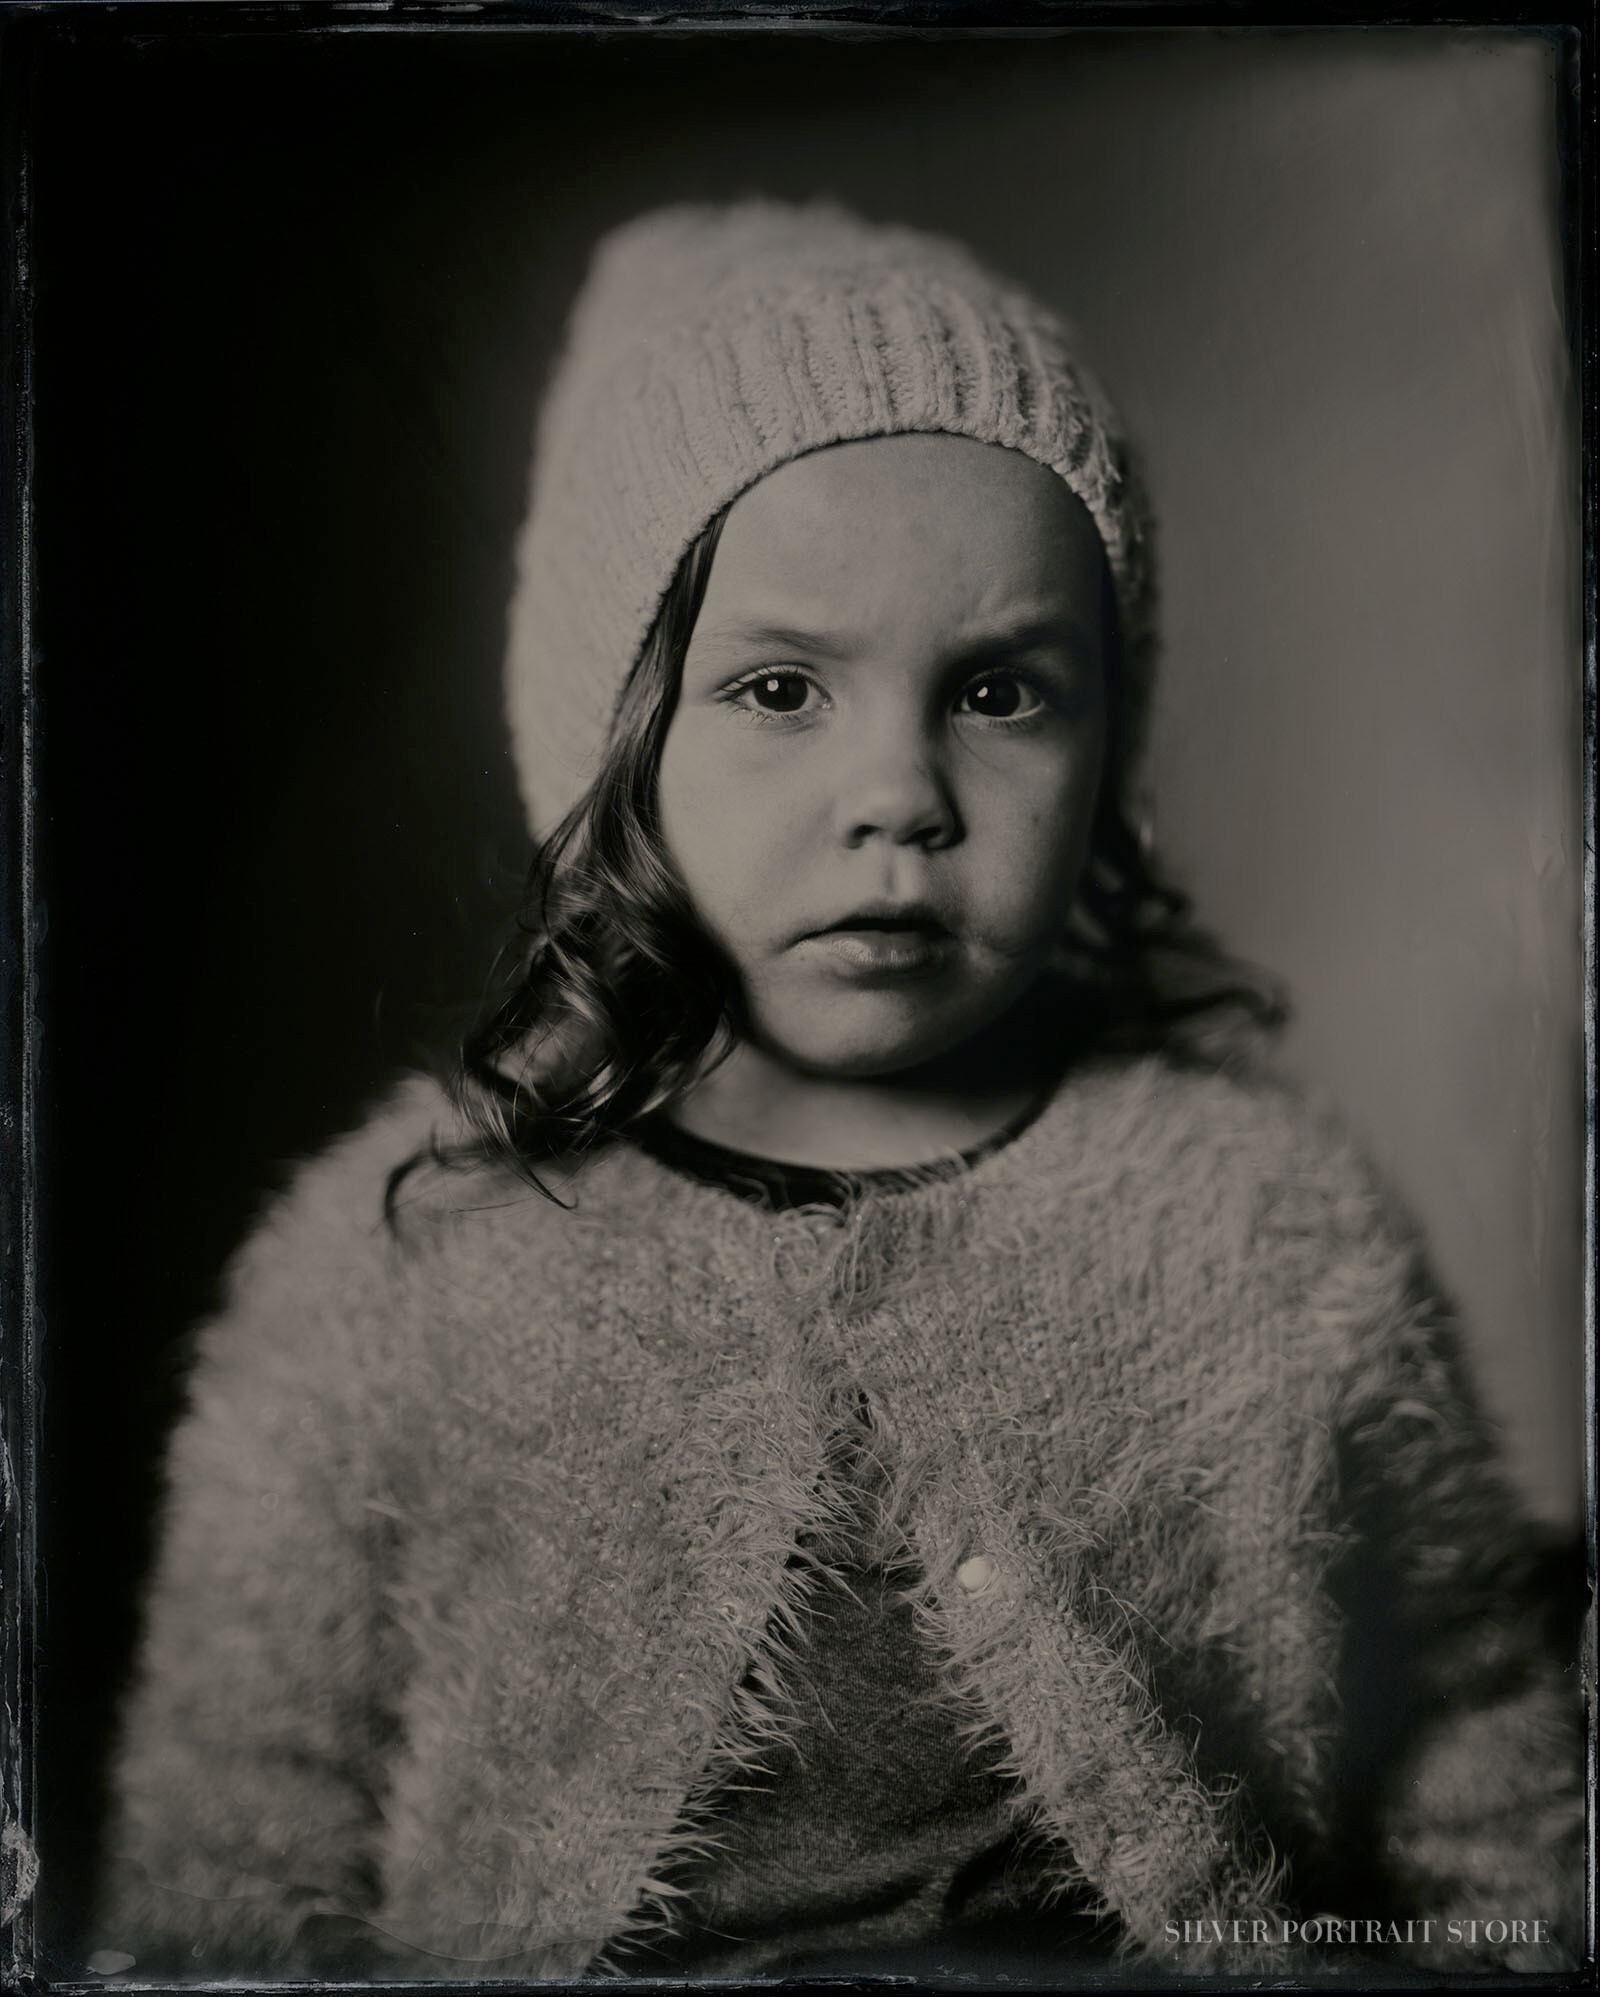 Leah-Silver Portrait Store-Scan from Wet plate collodion-Tintype 20 x 25 cm